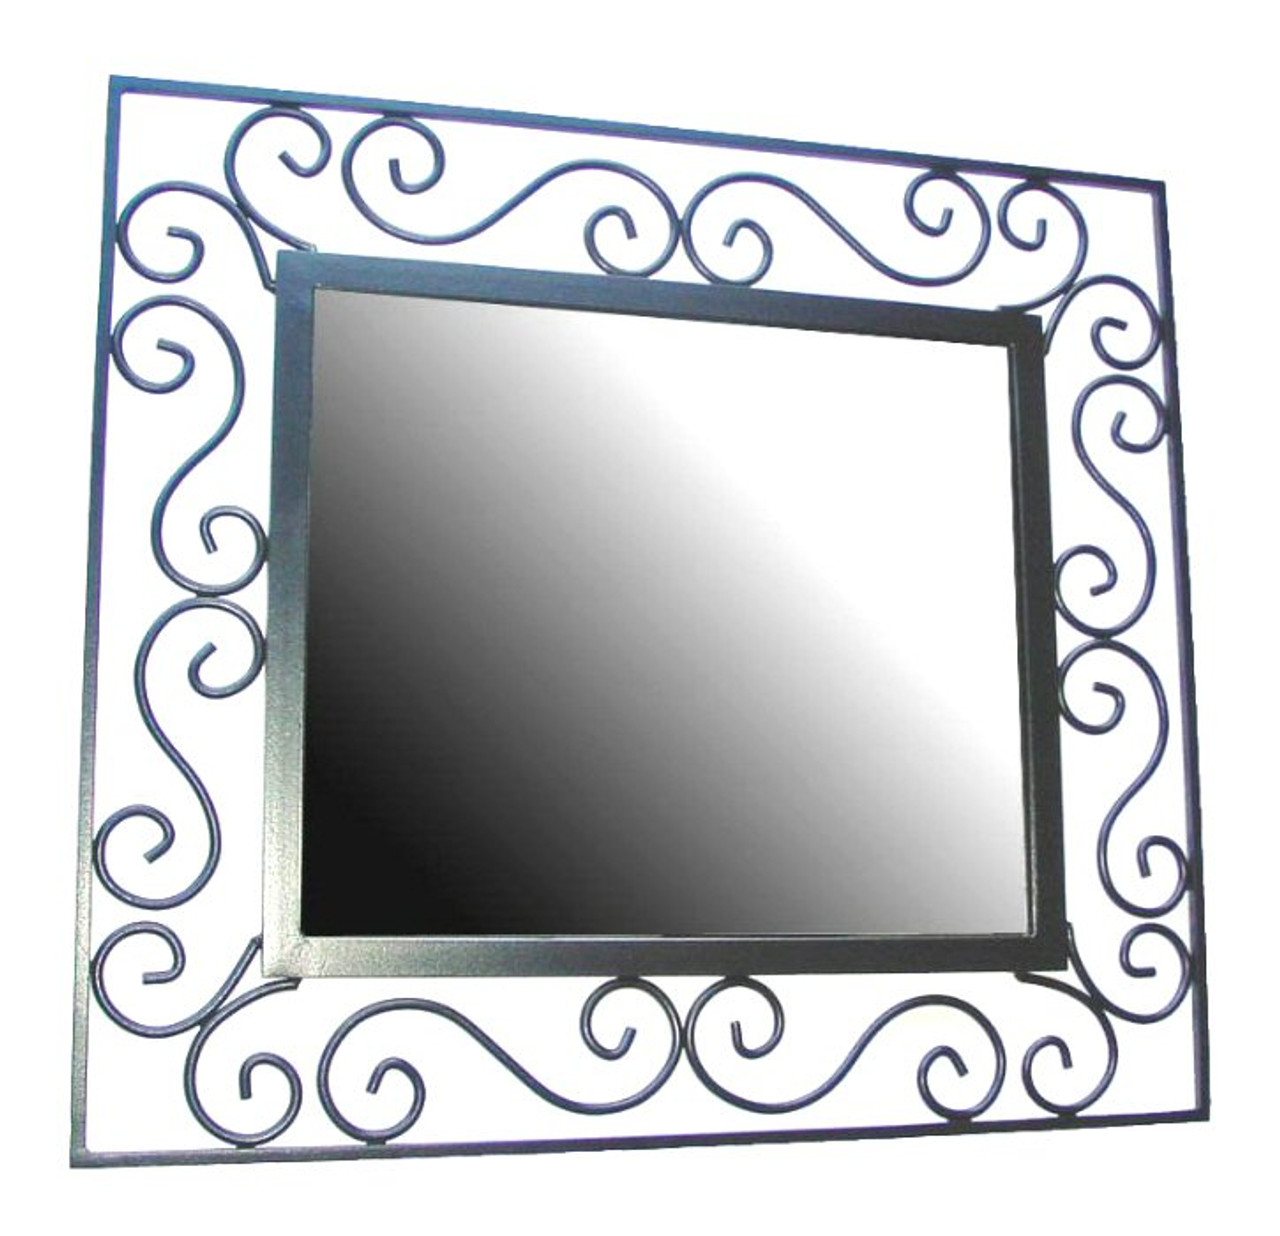 Better Homes And Gardens Round Metal Decorative Wall Mirror 24